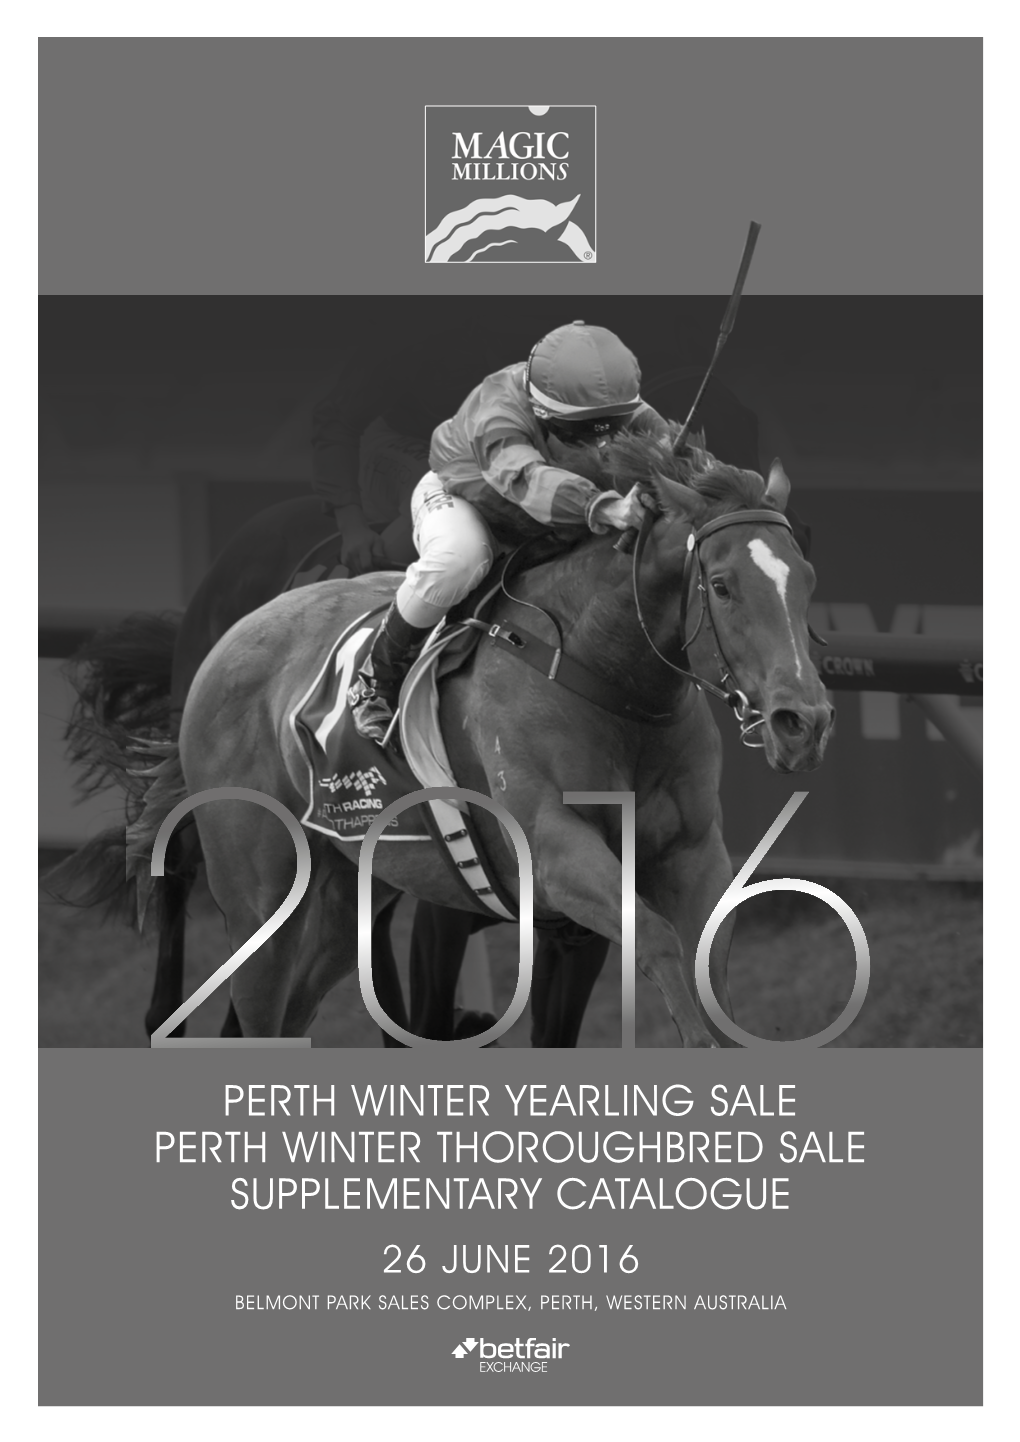 Perth Winter Yearling Sale Perth Winter Thoroughbred Sale Supplementary Catalogue 26 June 2016 Belmont Park Sales Complex, Perth, Western Australia